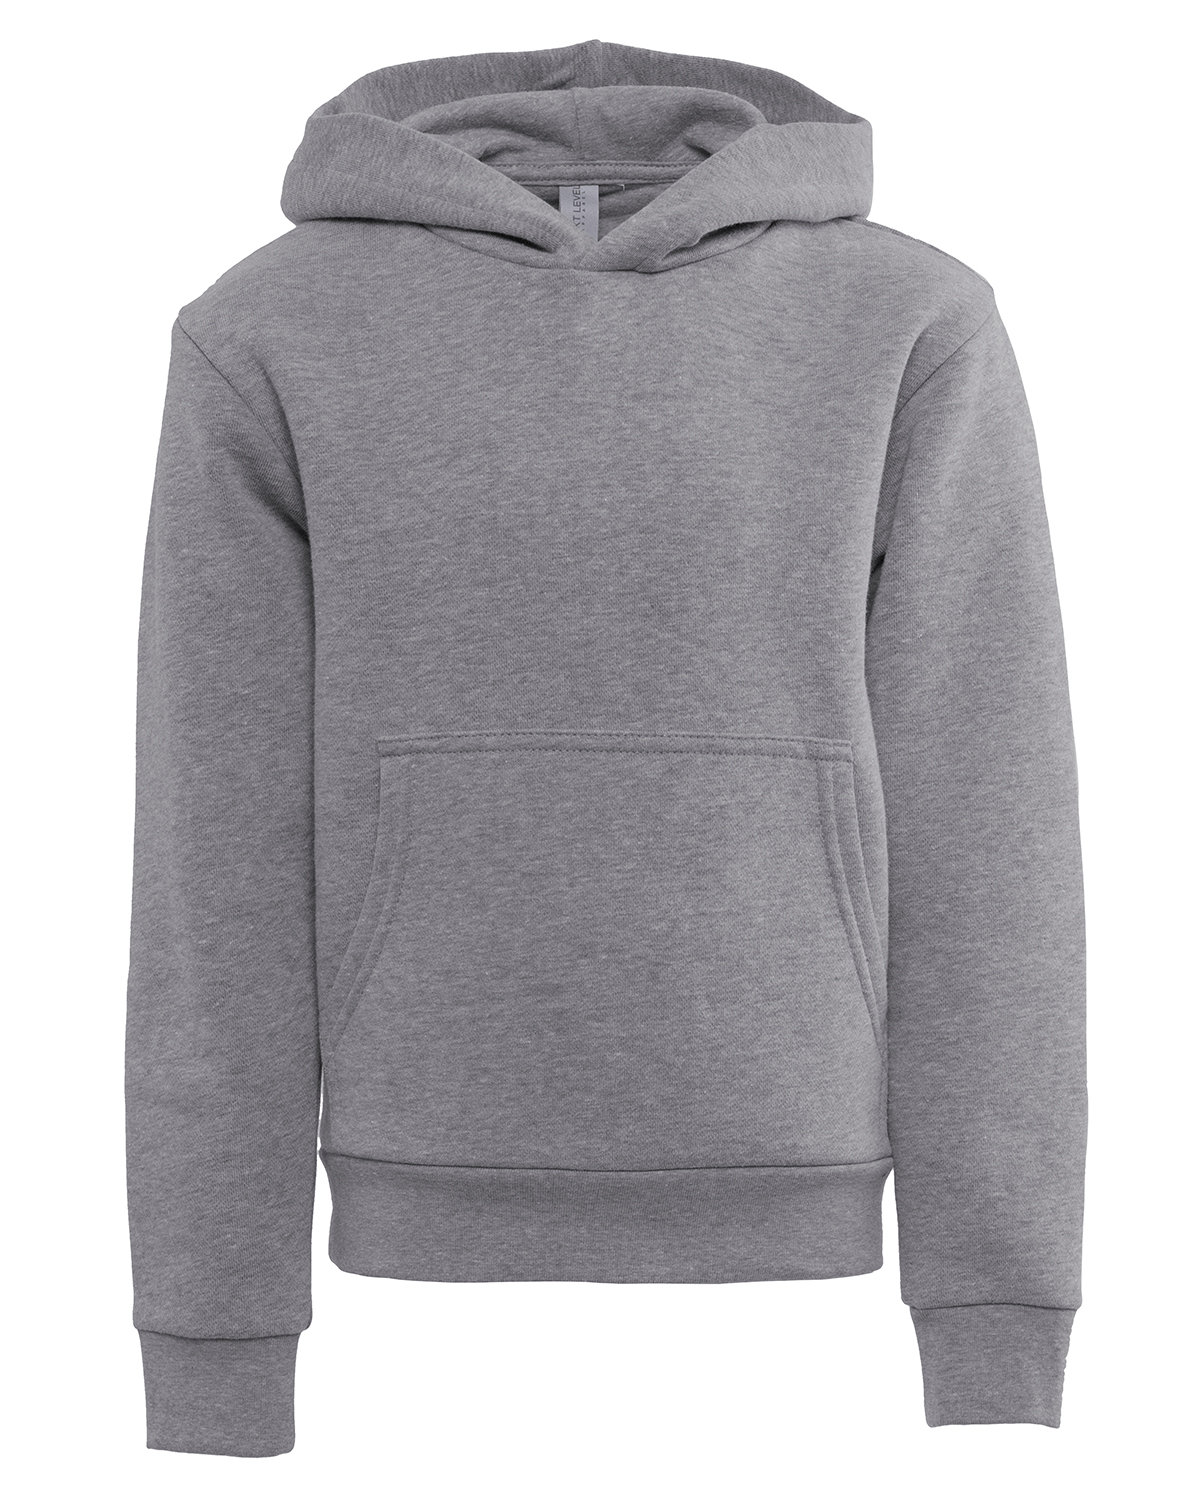 Picture of Next Level Apparel Youth Fleece Pullover Hooded Sweatshirt